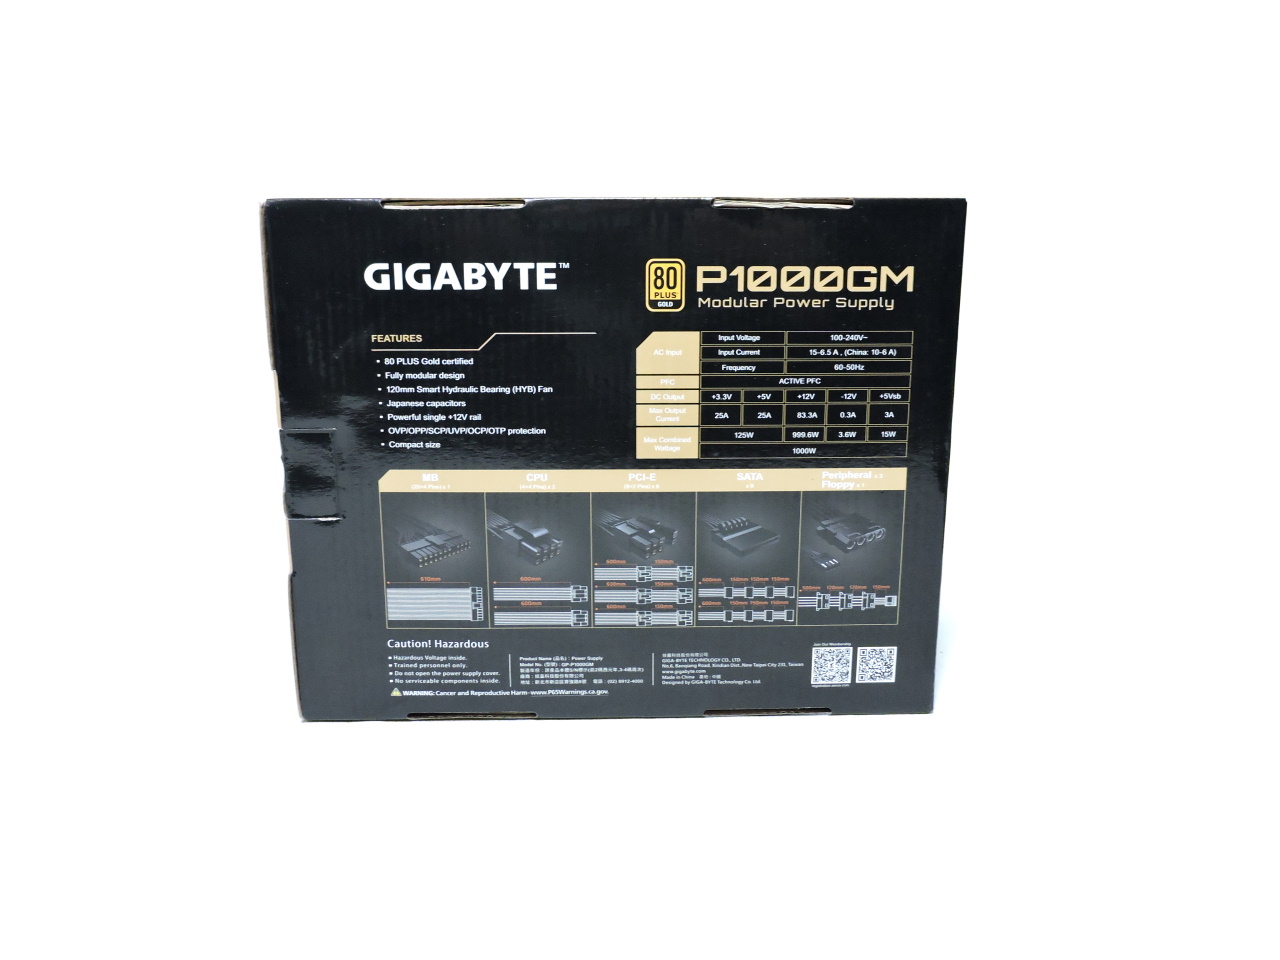 P1000GM Key Features  Power Supply - GIGABYTE Global